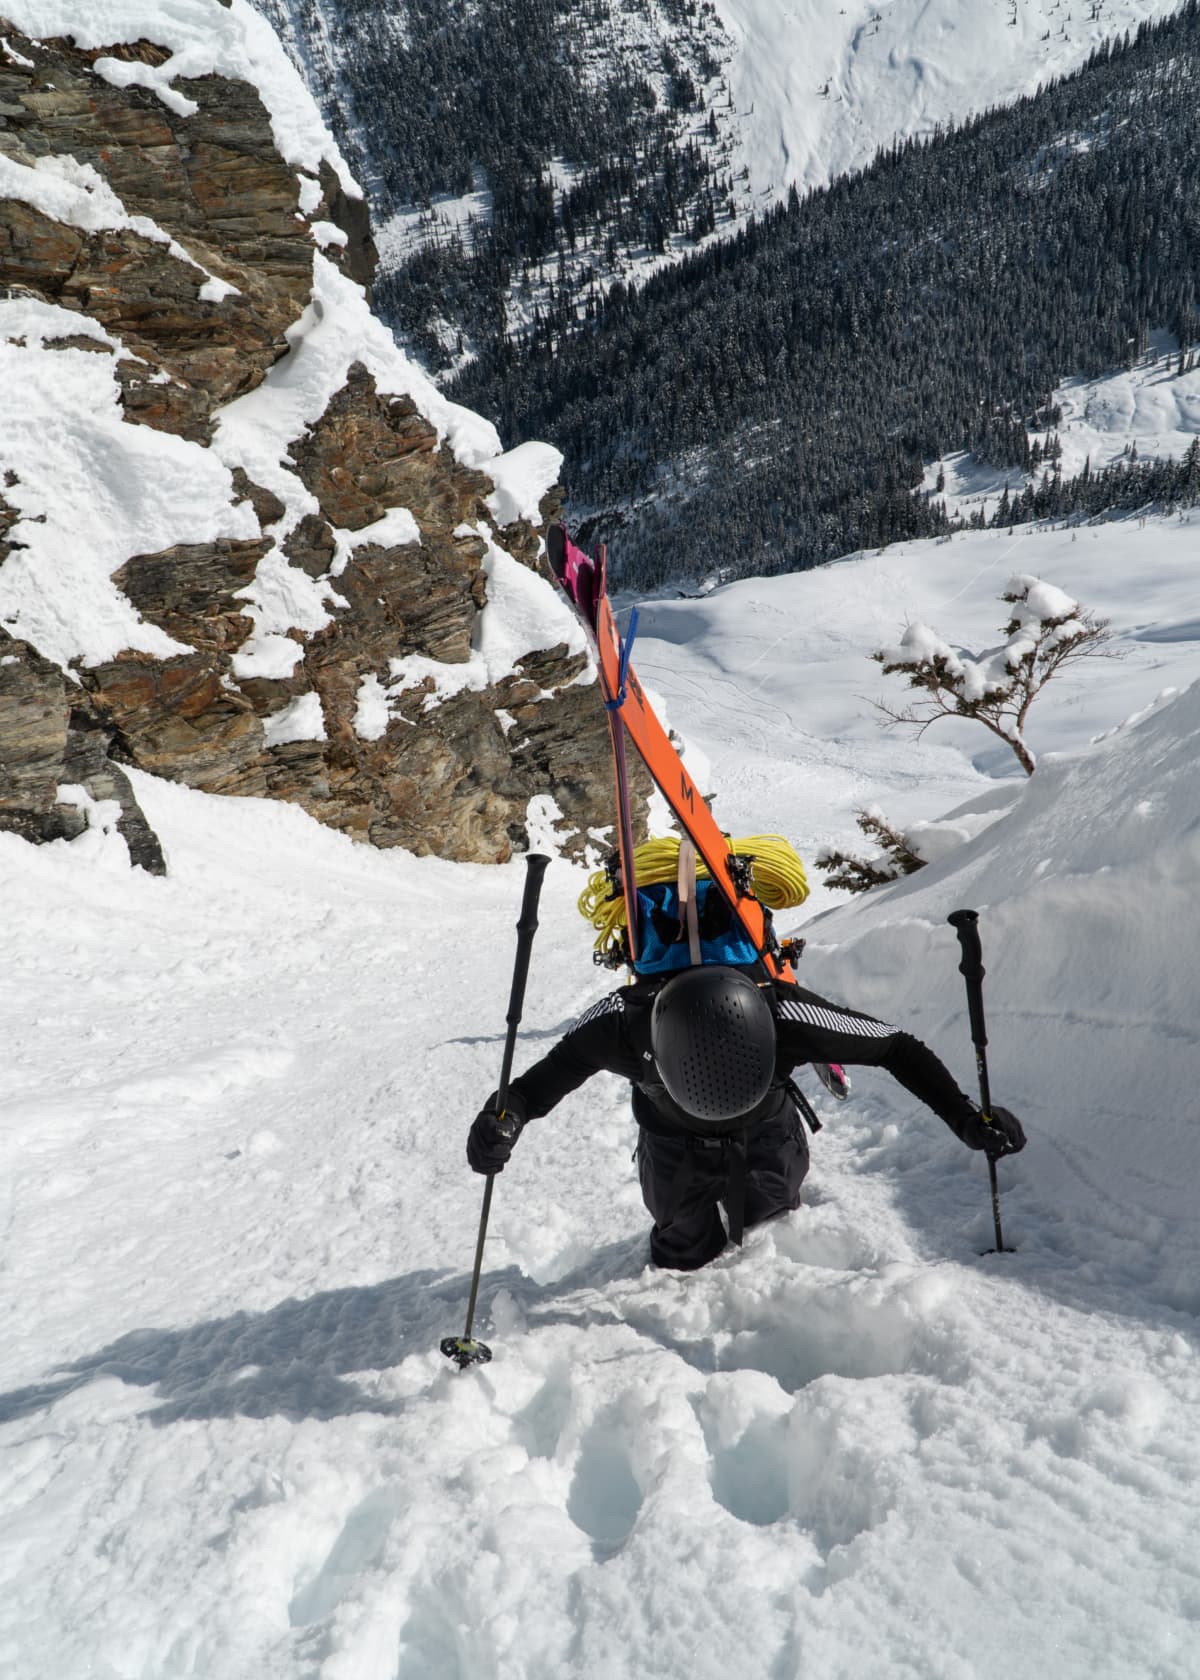 mountaineer booting up a steep couloir with skis on his back